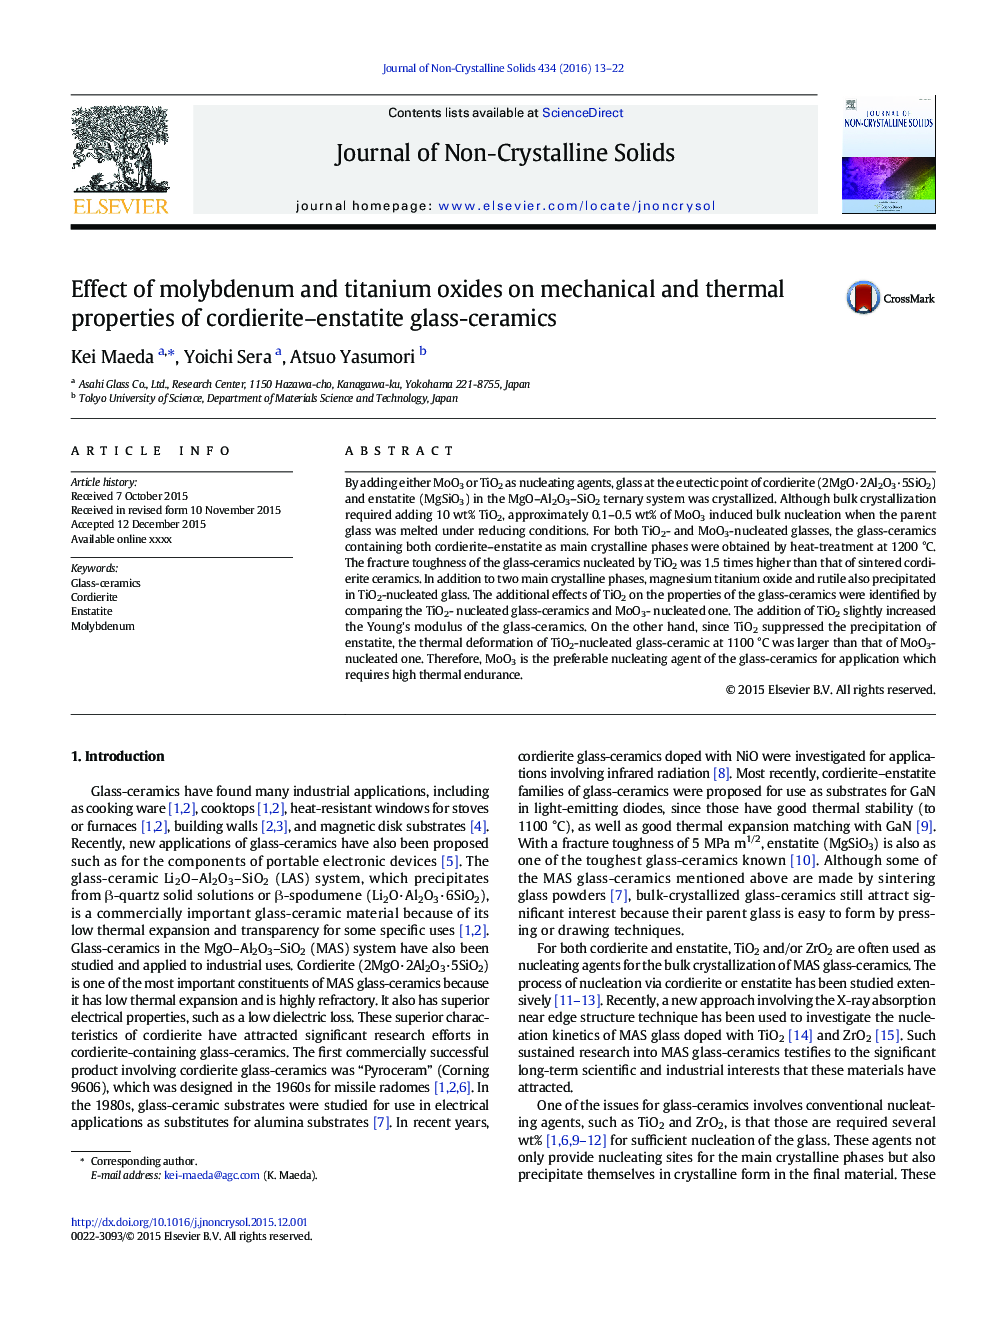 Effect of molybdenum and titanium oxides on mechanical and thermal properties of cordierite-enstatite glass-ceramics